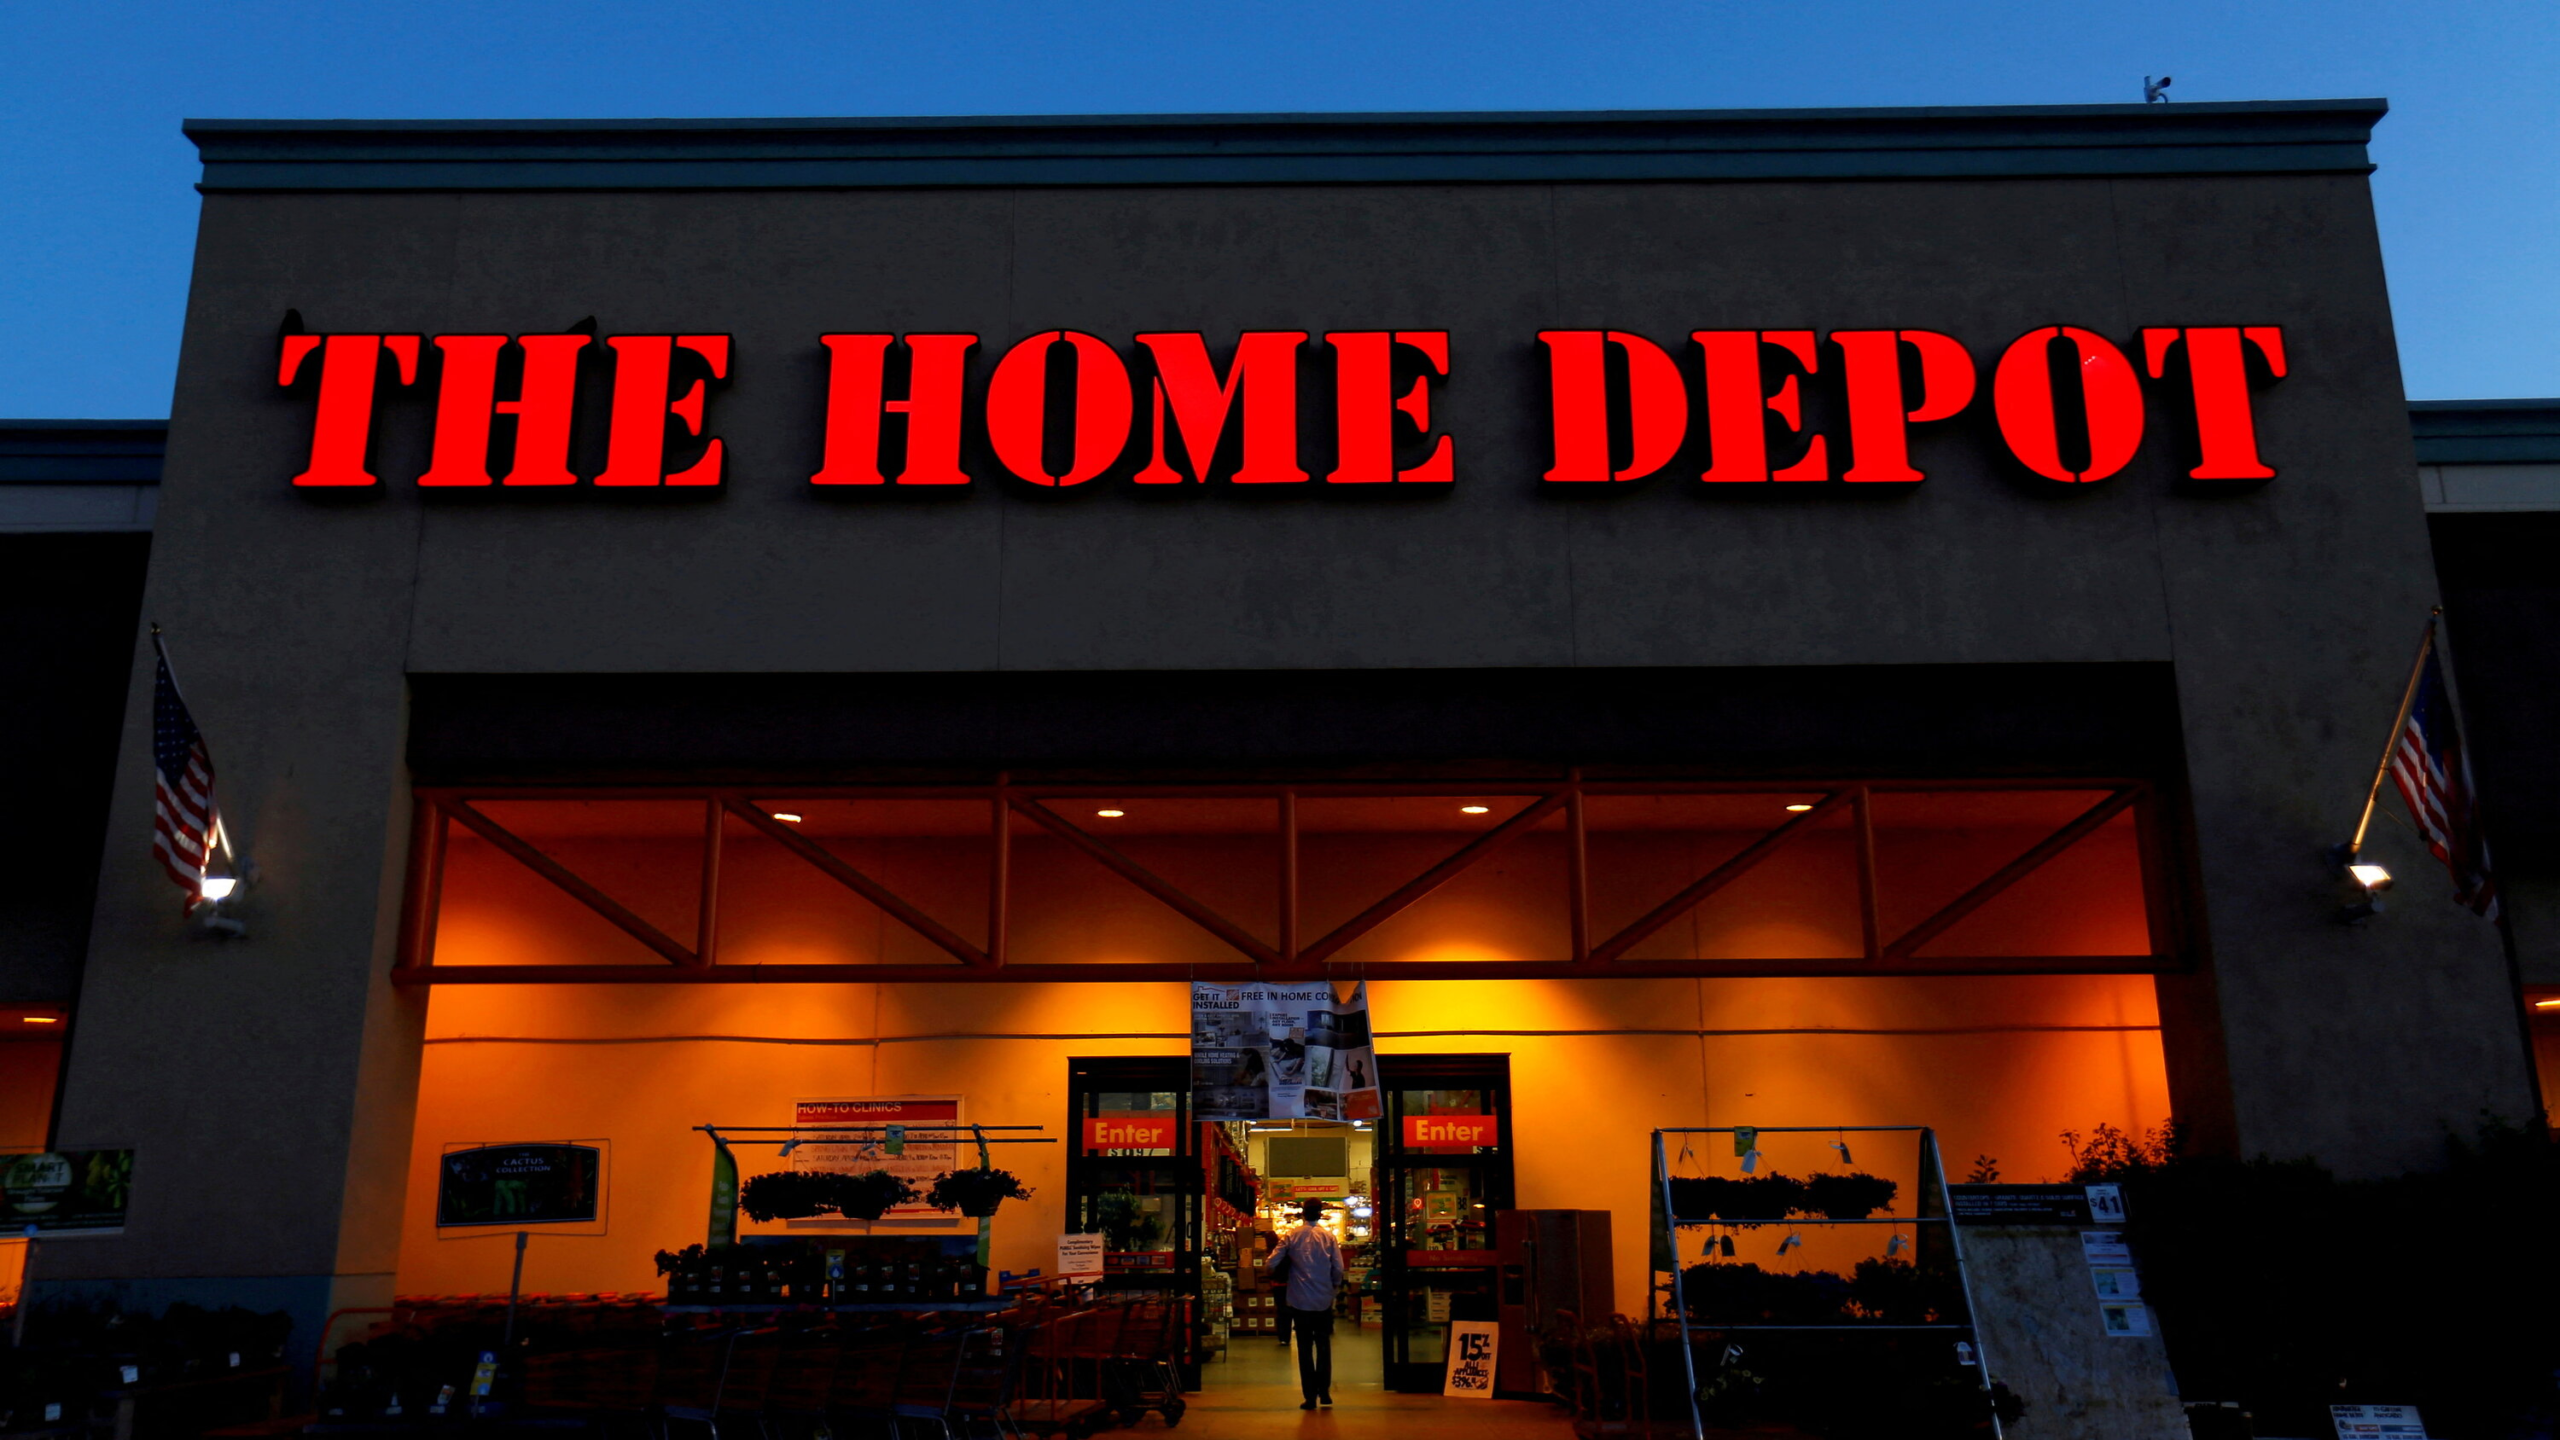 Does Home Depot offer 5% off?